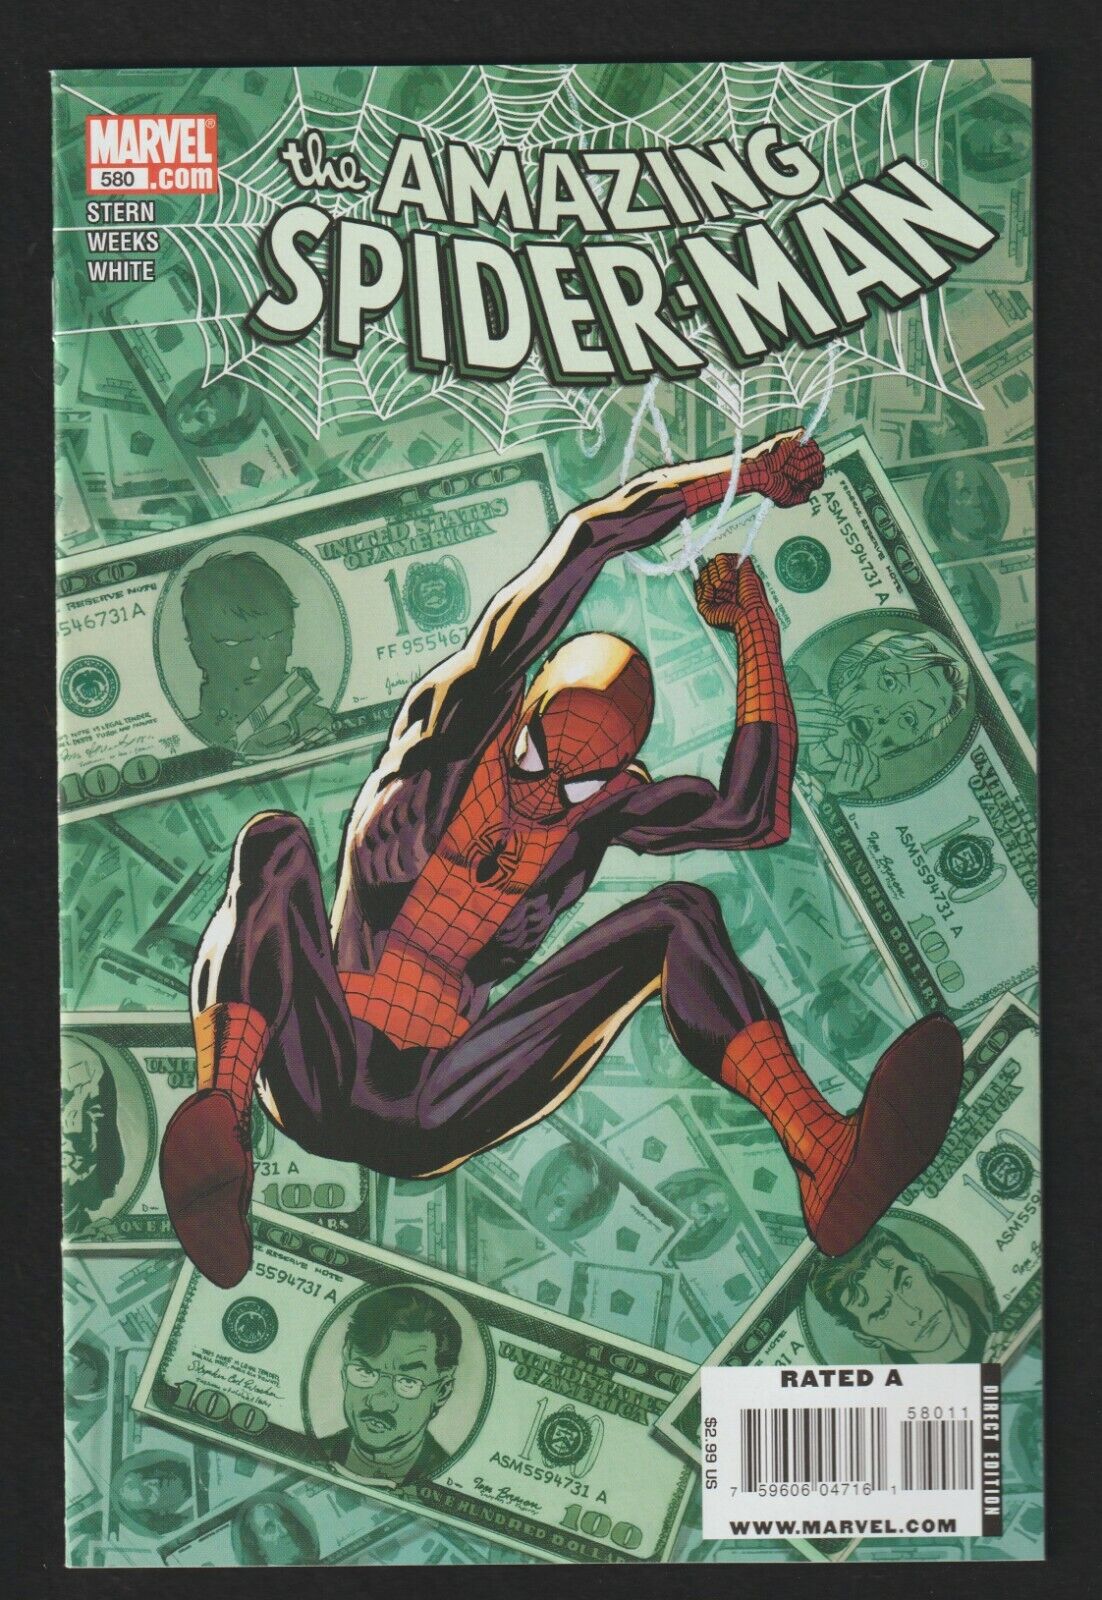 The Amazing Spider-Man, Vol. 2 #580 (Marvel, 2009) Fill In The Blank